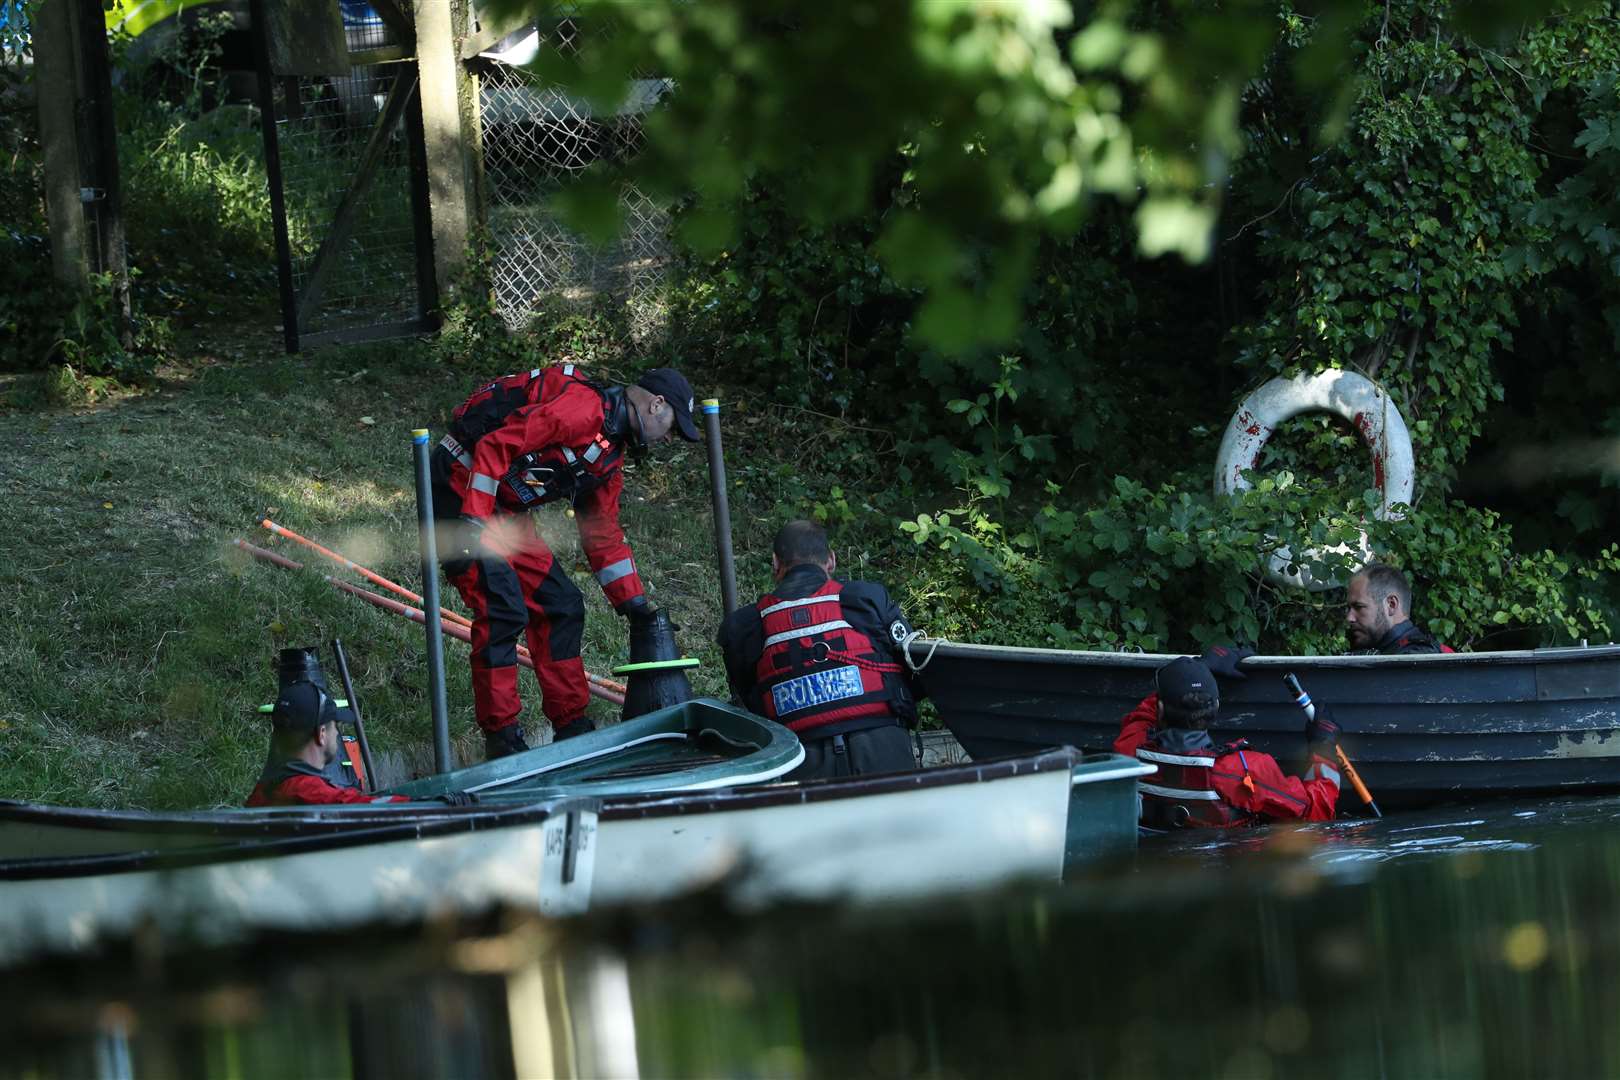 Police forensic officers in waterproof clothing gather evidence in the lake near the boats on the grounds of Lullingstone Castle in Eynsford, Kent (Yui Mok/PA)